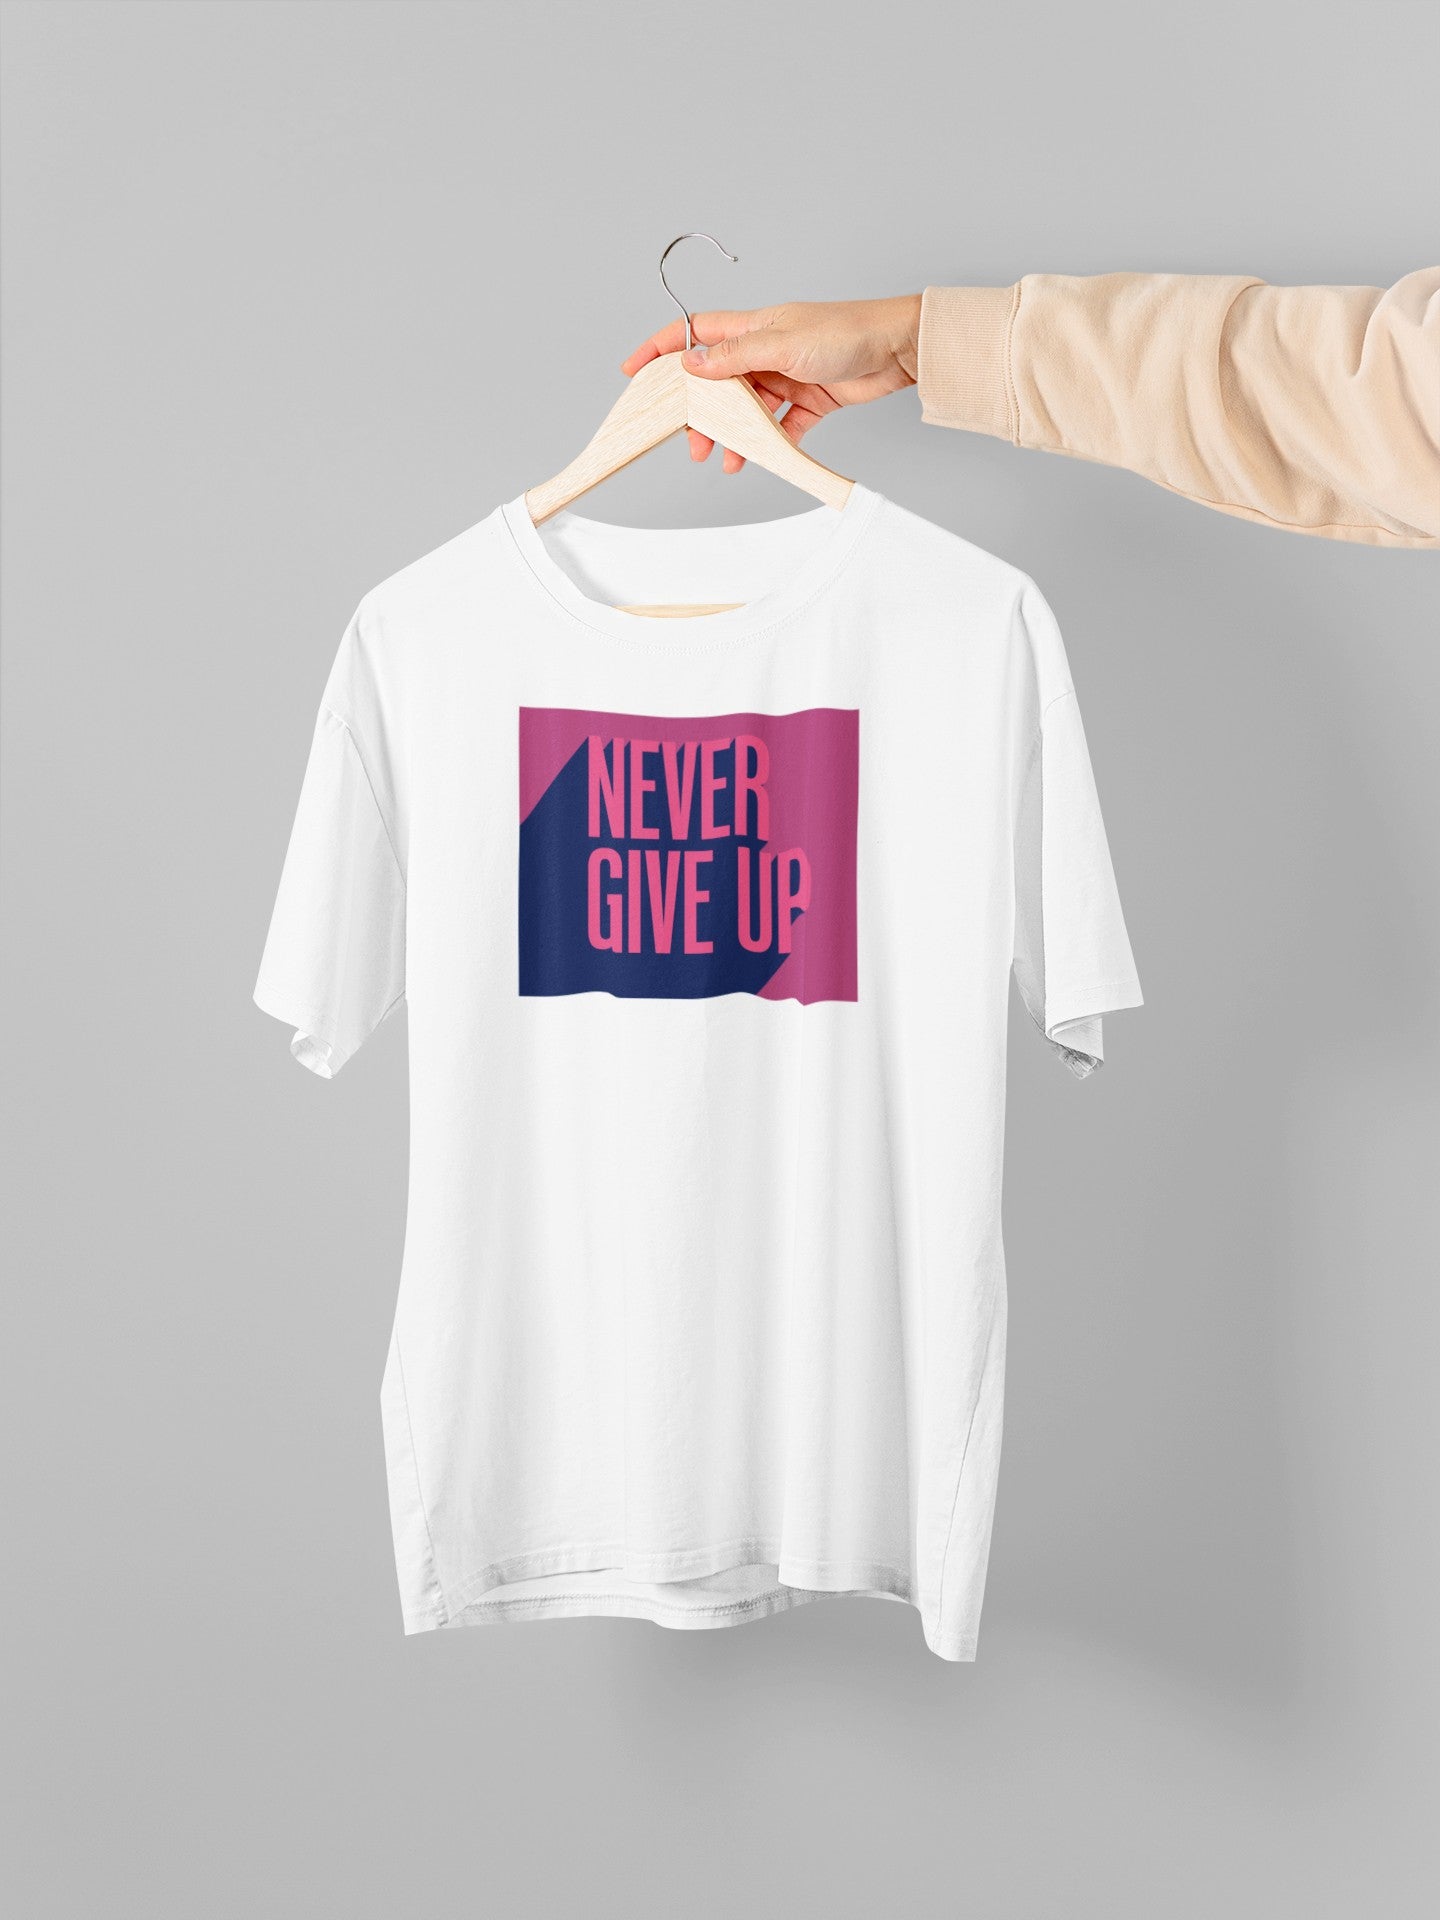 Gym T Shirt - Never Give Up 2.0 - Men T-Shirt with premium cotton Lycra. The Sports T Shirt by Strong Soul